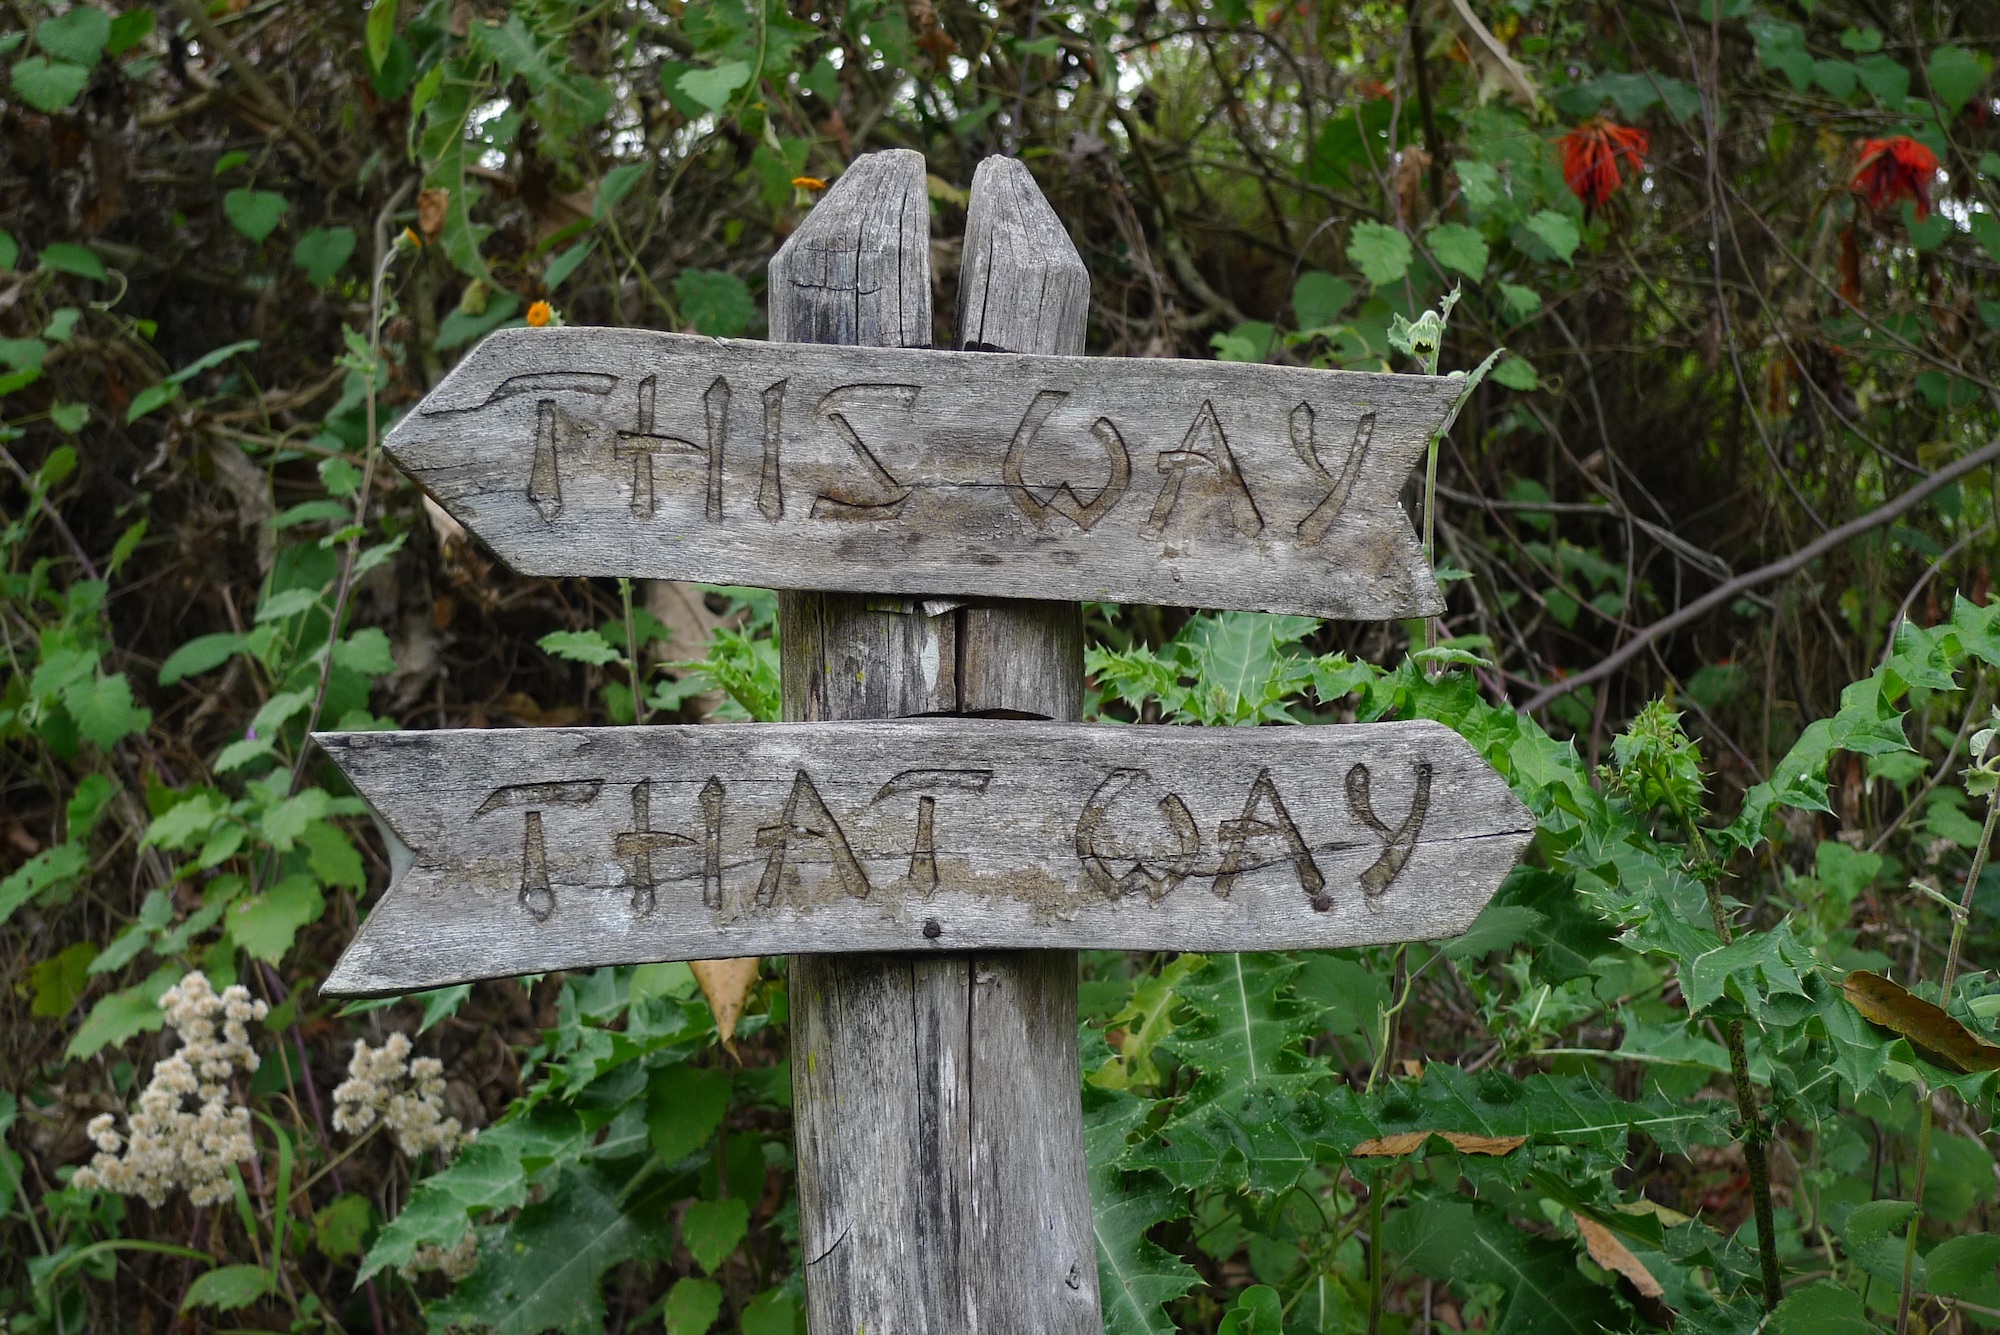 Two signs pointing opposite directions, now says 'this way' & one says 'that way'